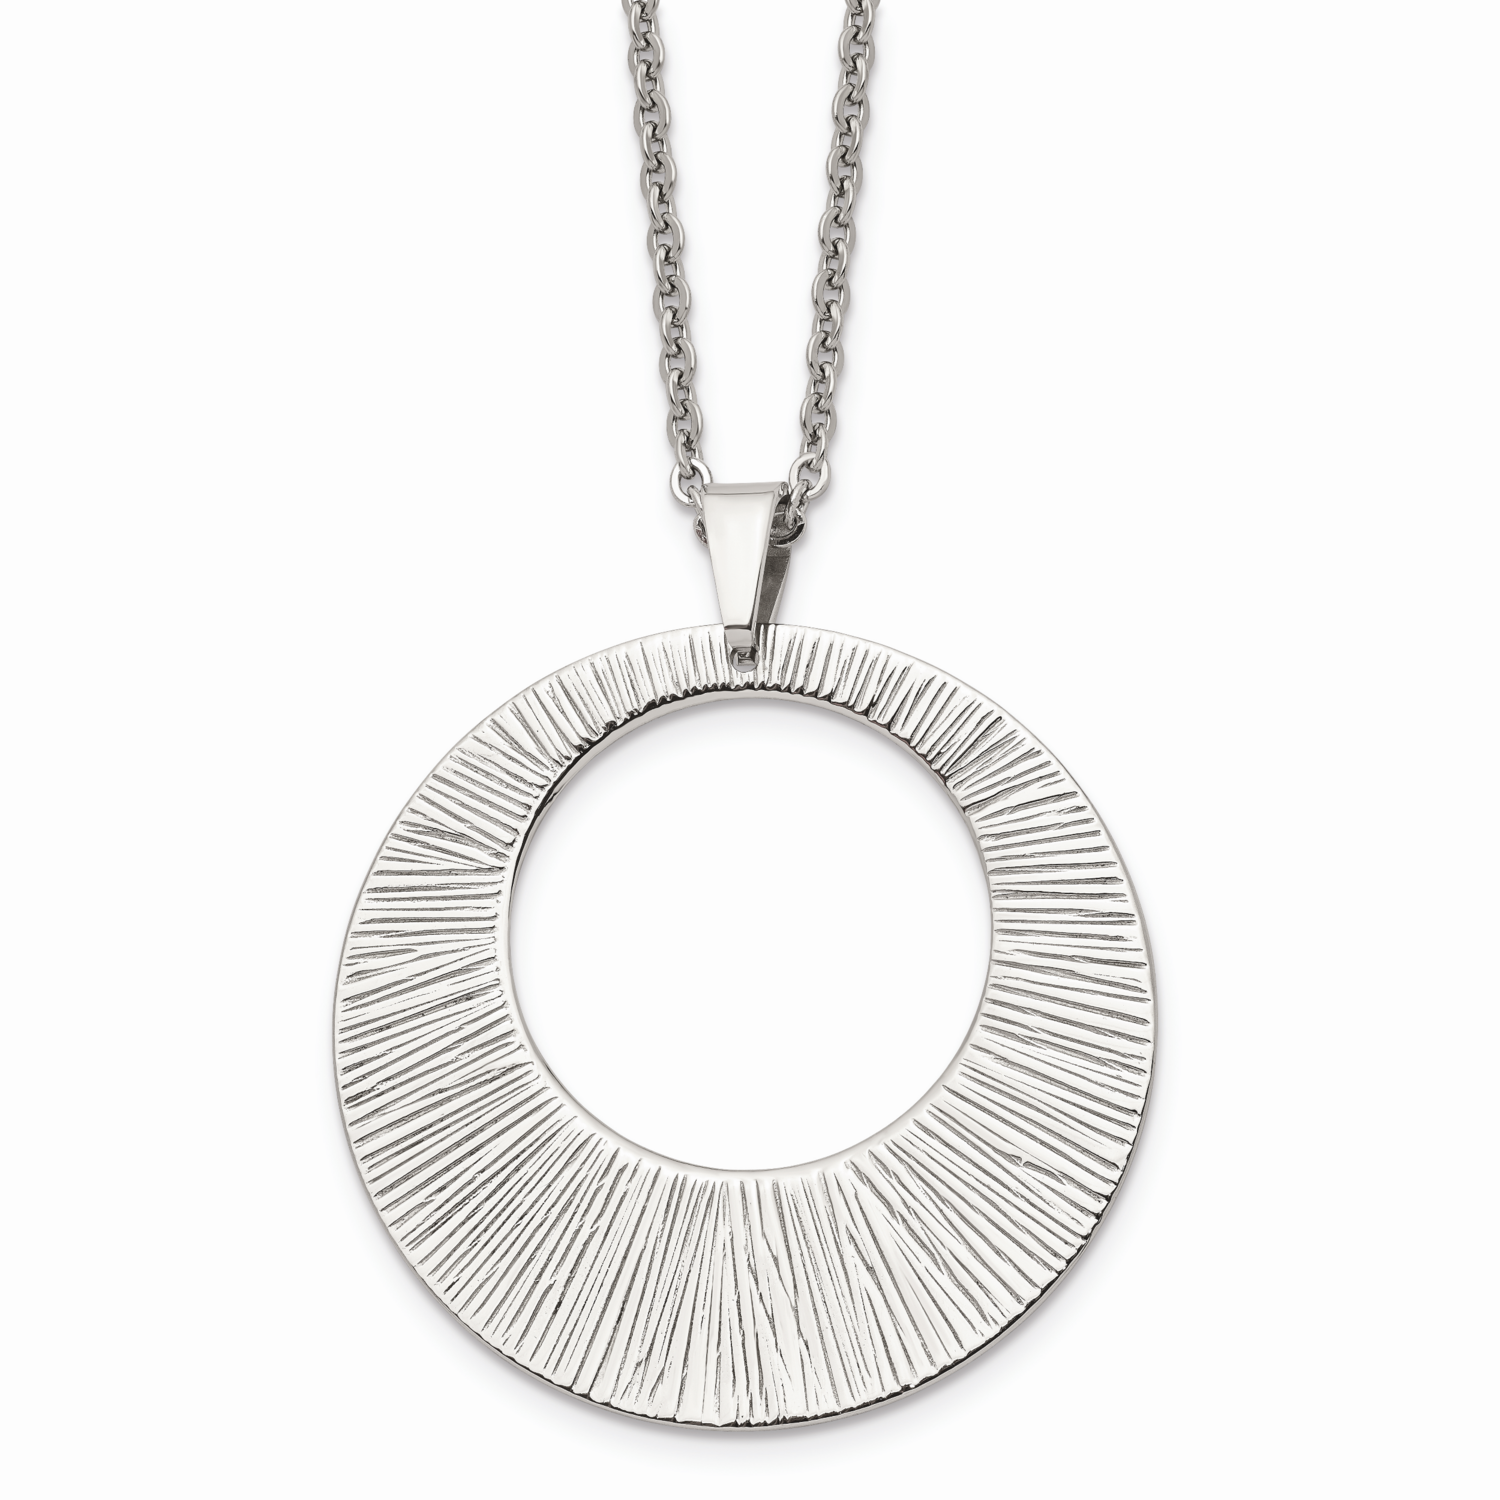 Textured Pendant Necklace Stainless Steel SRN894-24